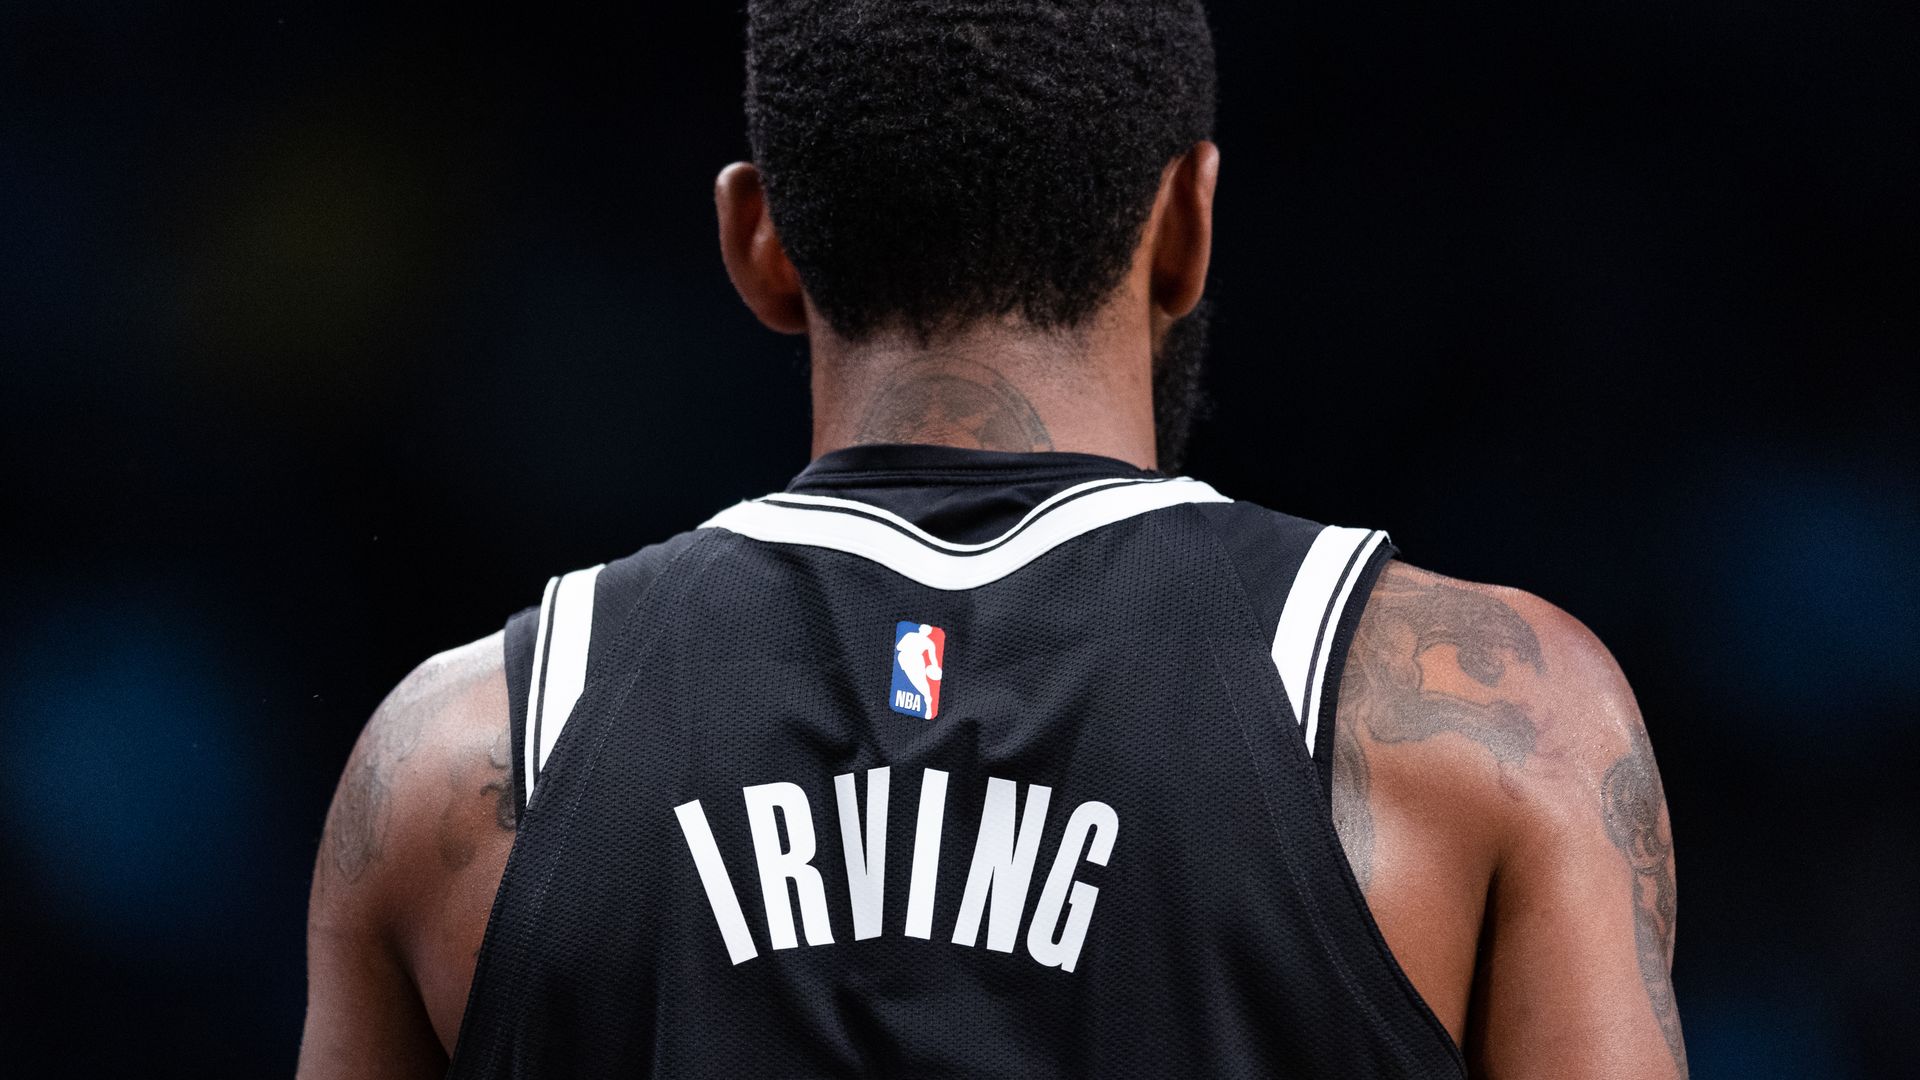 Kyrie Irving will begin suspension of at least 5 games Friday over